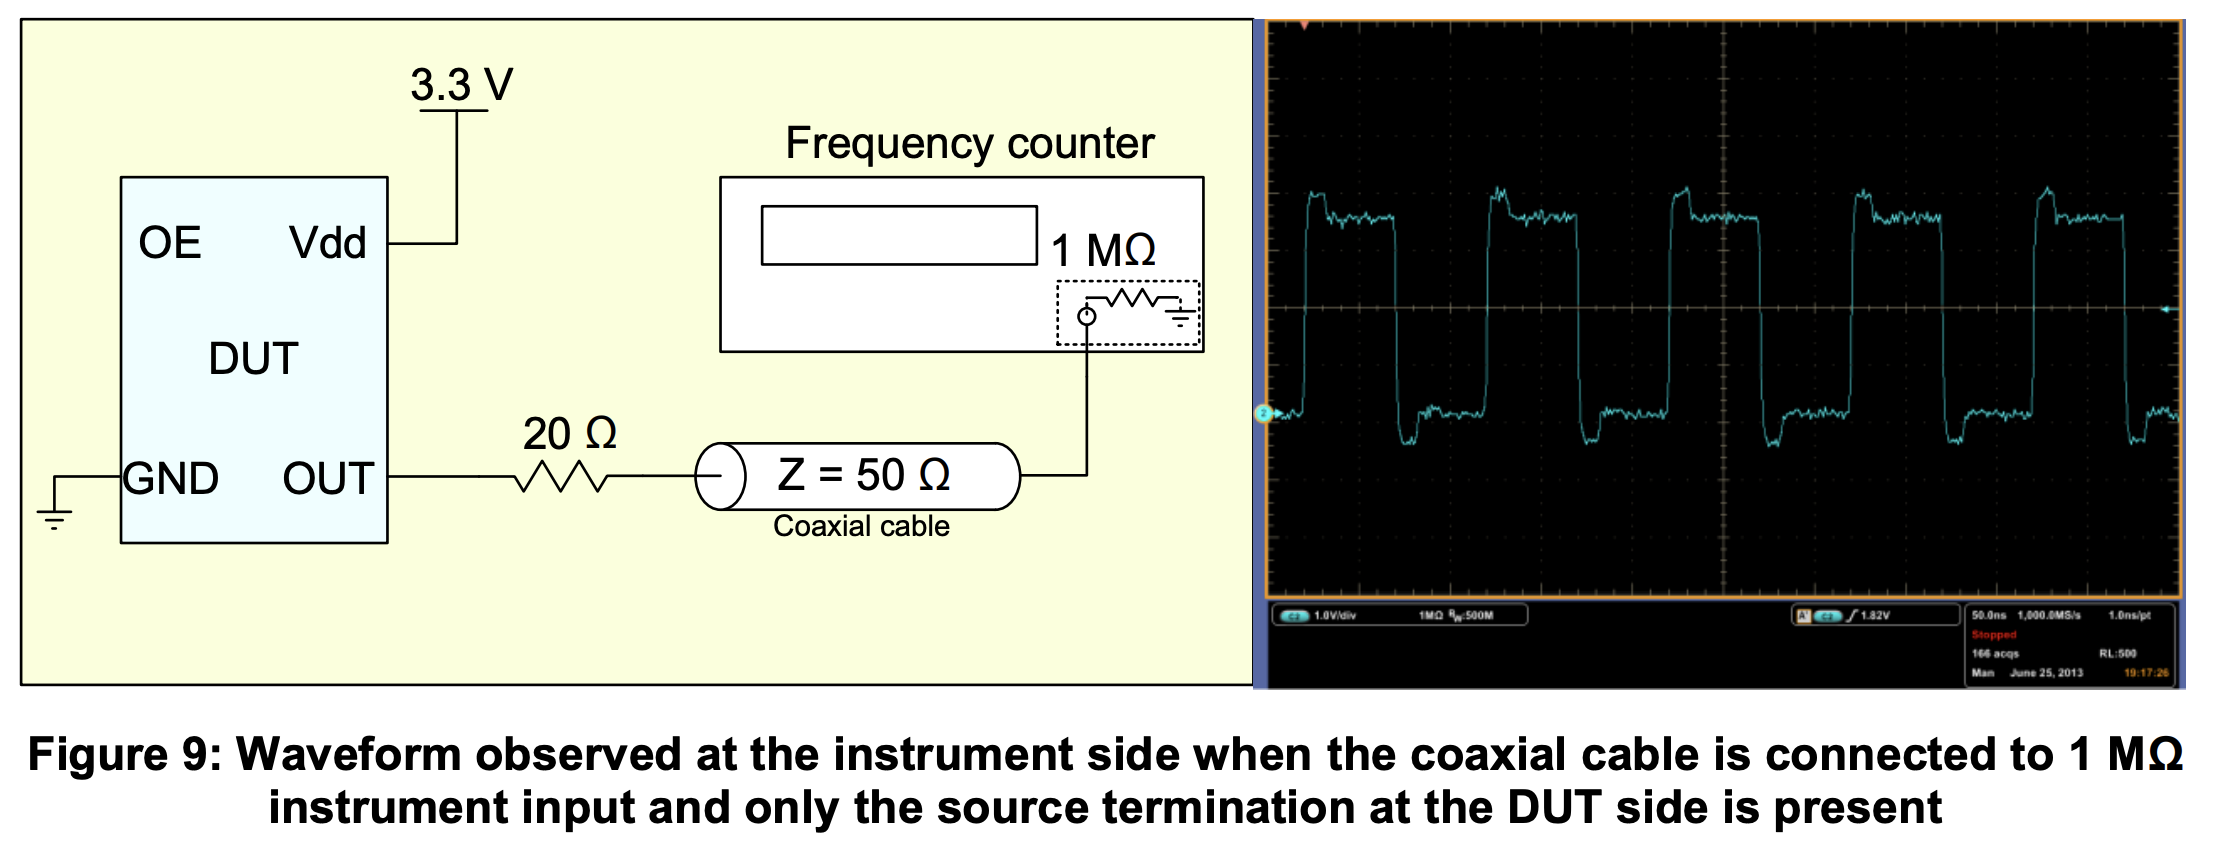 Figure 9 Waveform observed at the instrument side when the coaxial cable is connected